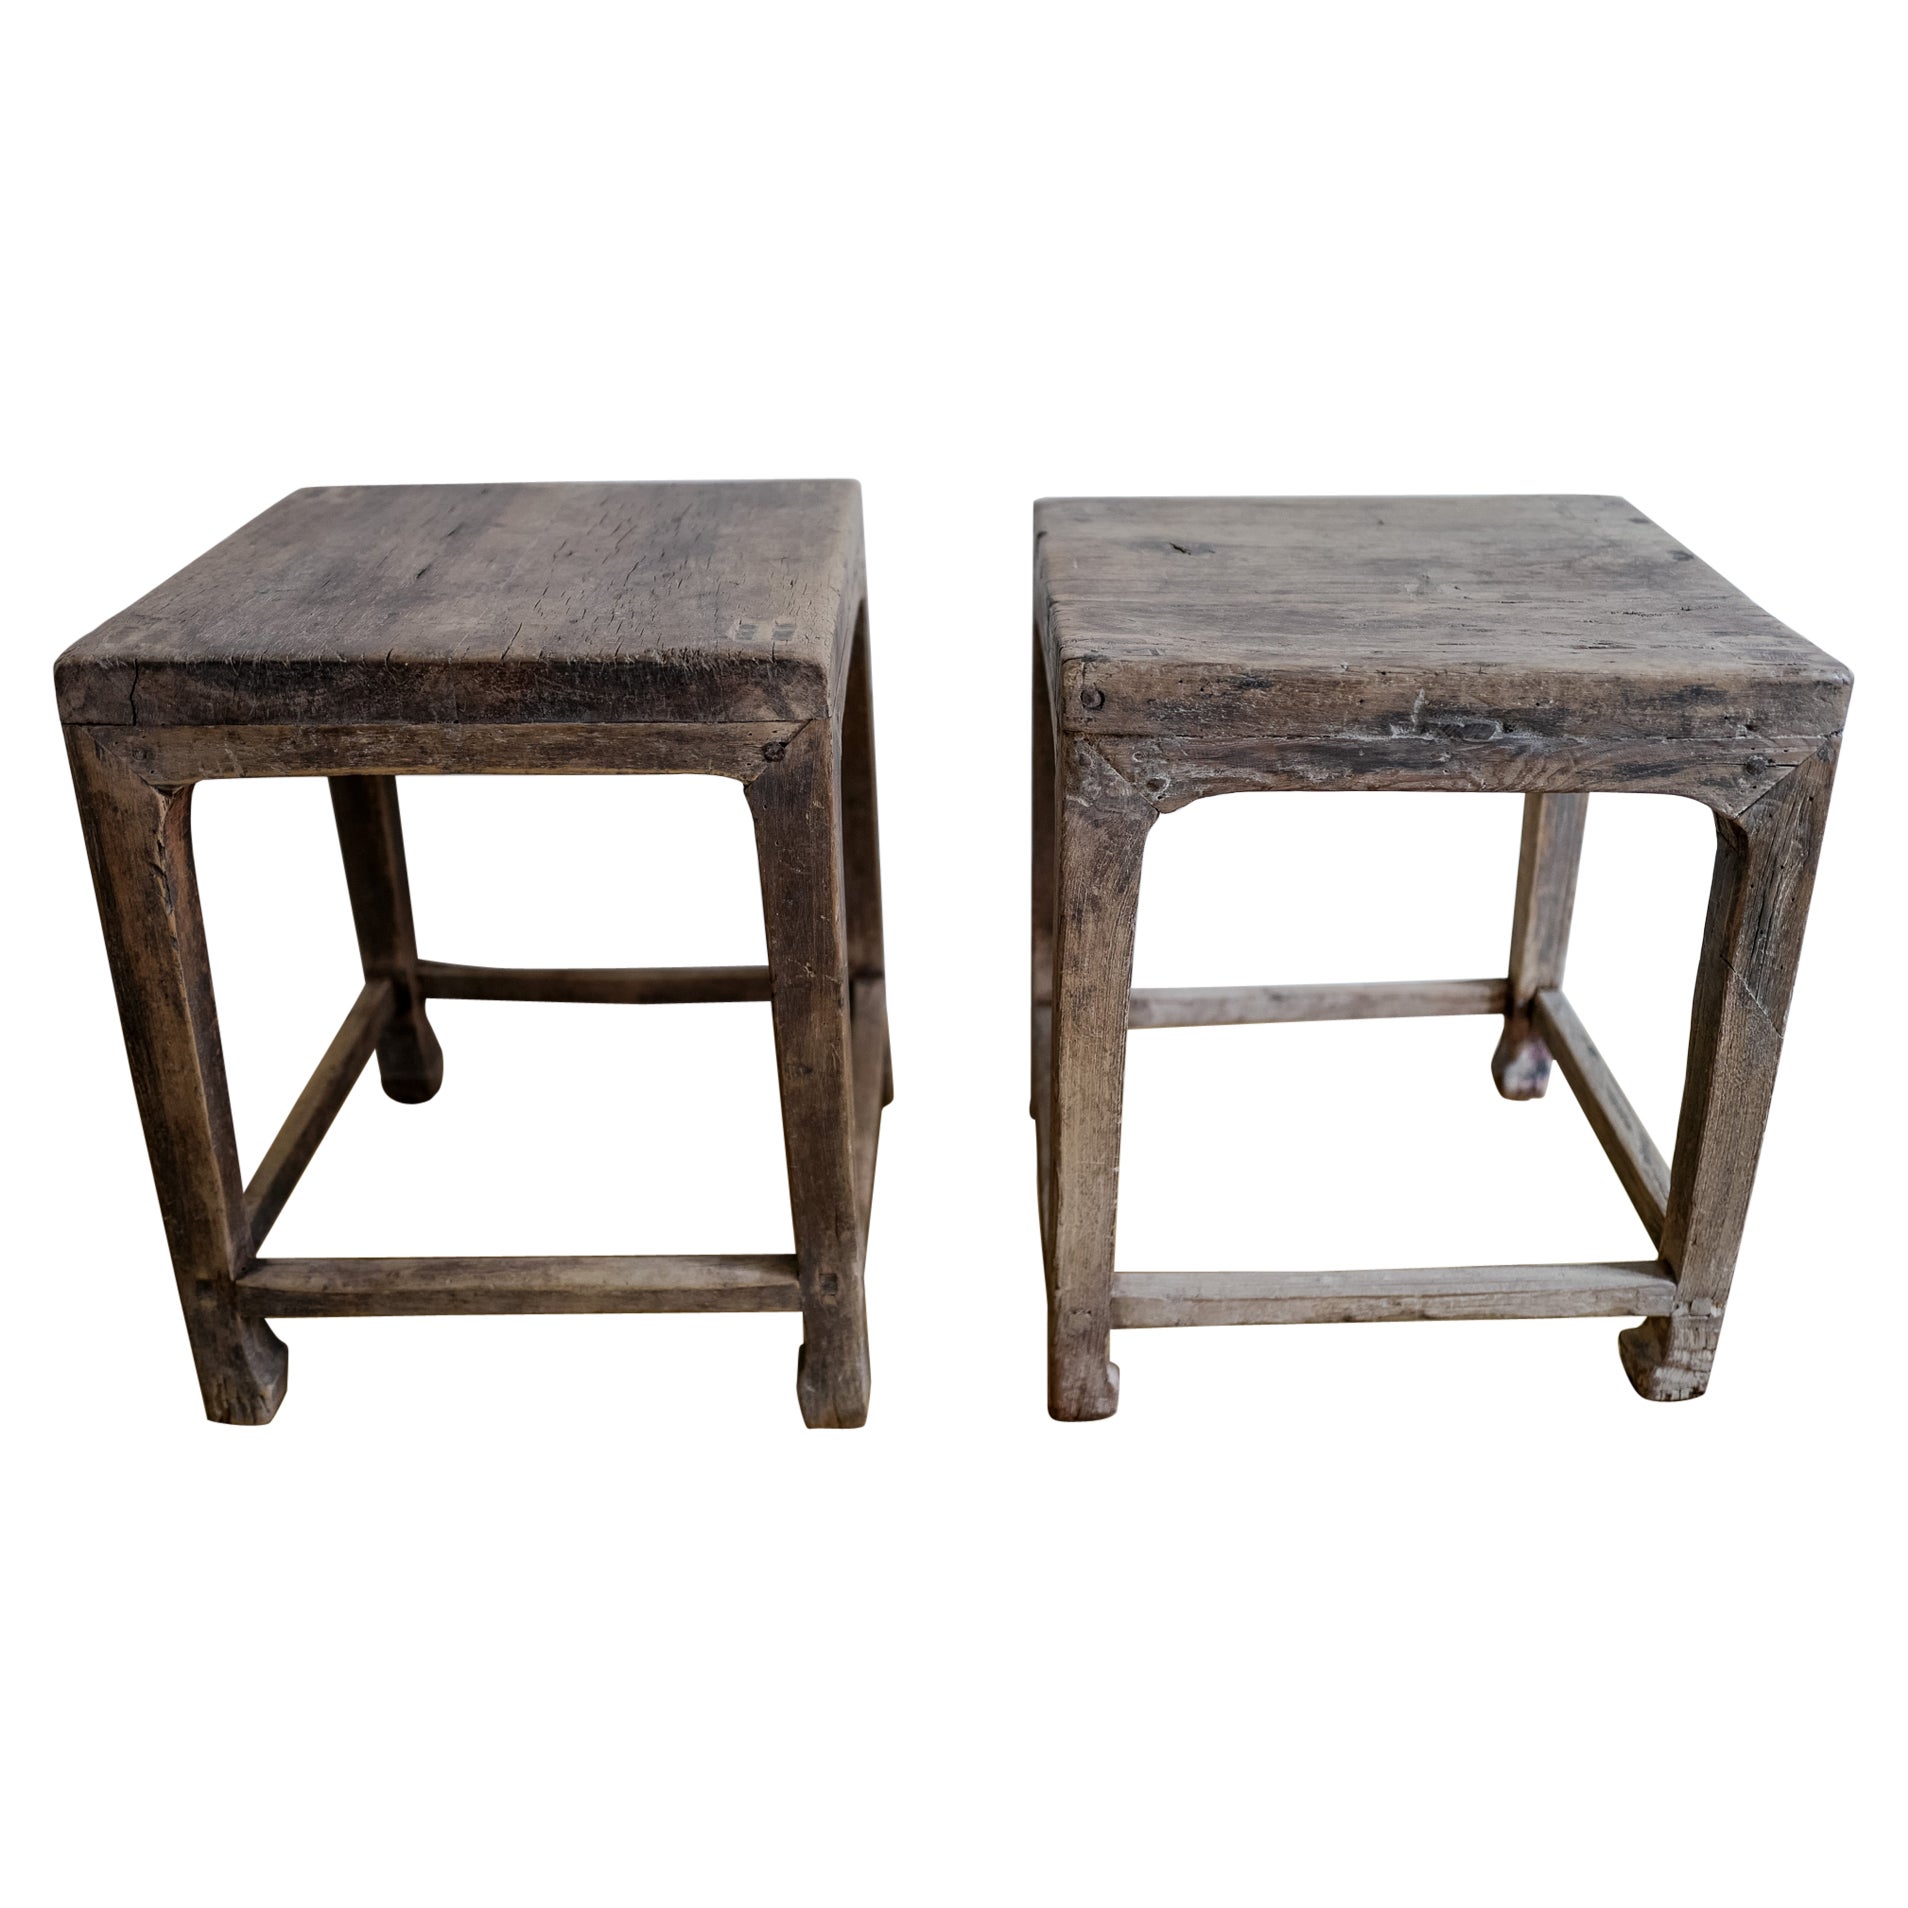 Handcrafted Elm Side Tables, Made in China, circa Early 20th Century For Sale